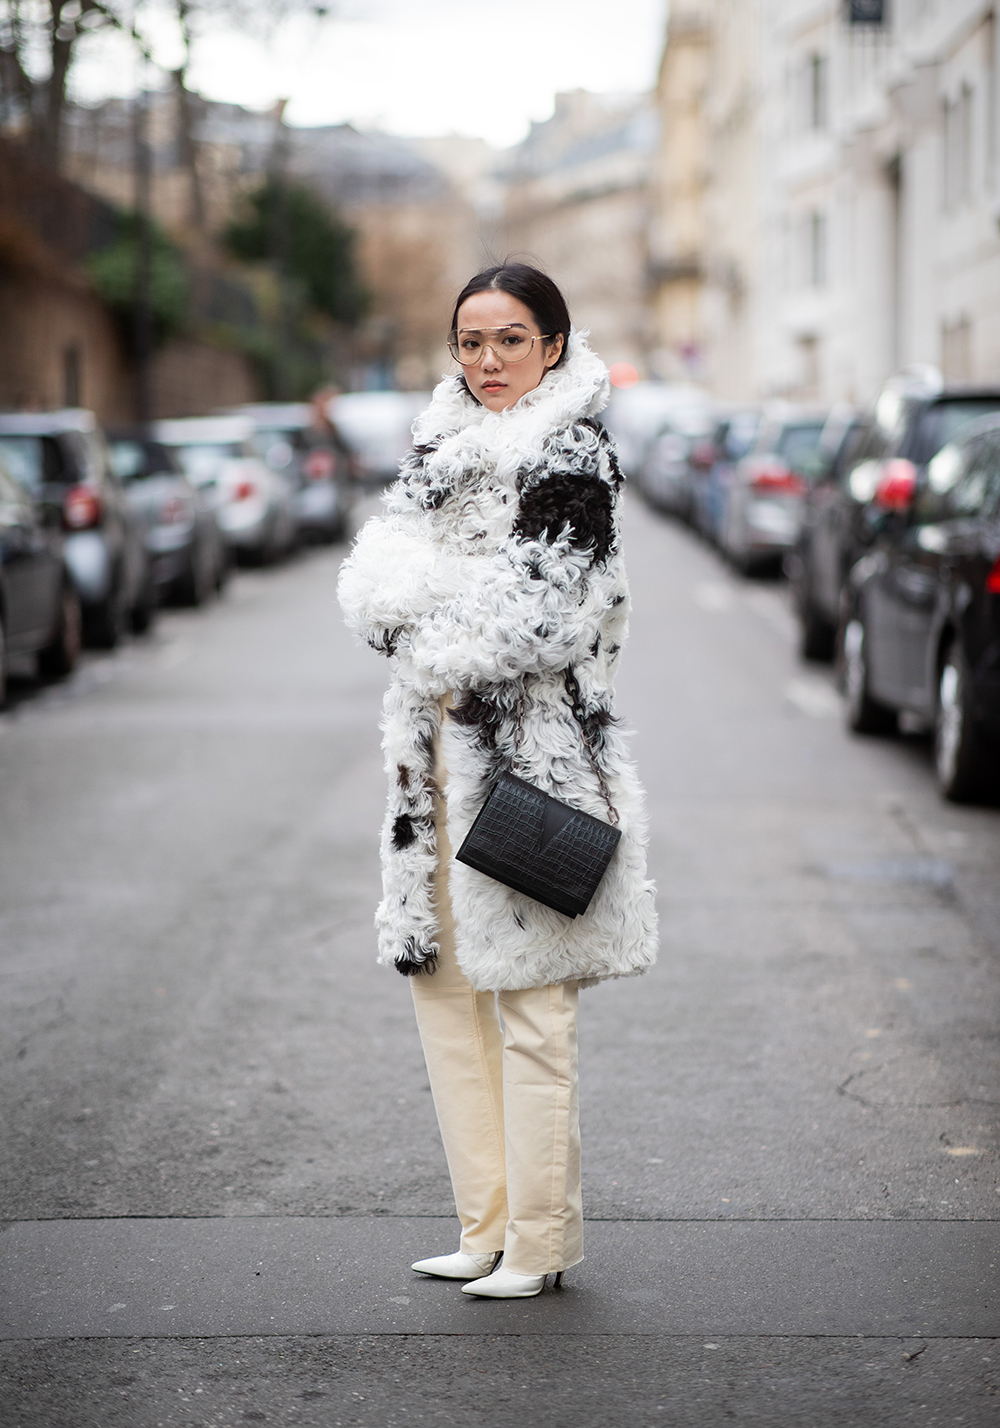 PARIS, FRANCE - MARCH 02: Yoyo Cao is seen wearing black white faux fur coat outside Elie Saab during Paris Fashion Week Womenswear Fall/Winter 2019/2020 on March 02, 2019 in Paris, France. (Photo by Christian Vierig/Getty Images)